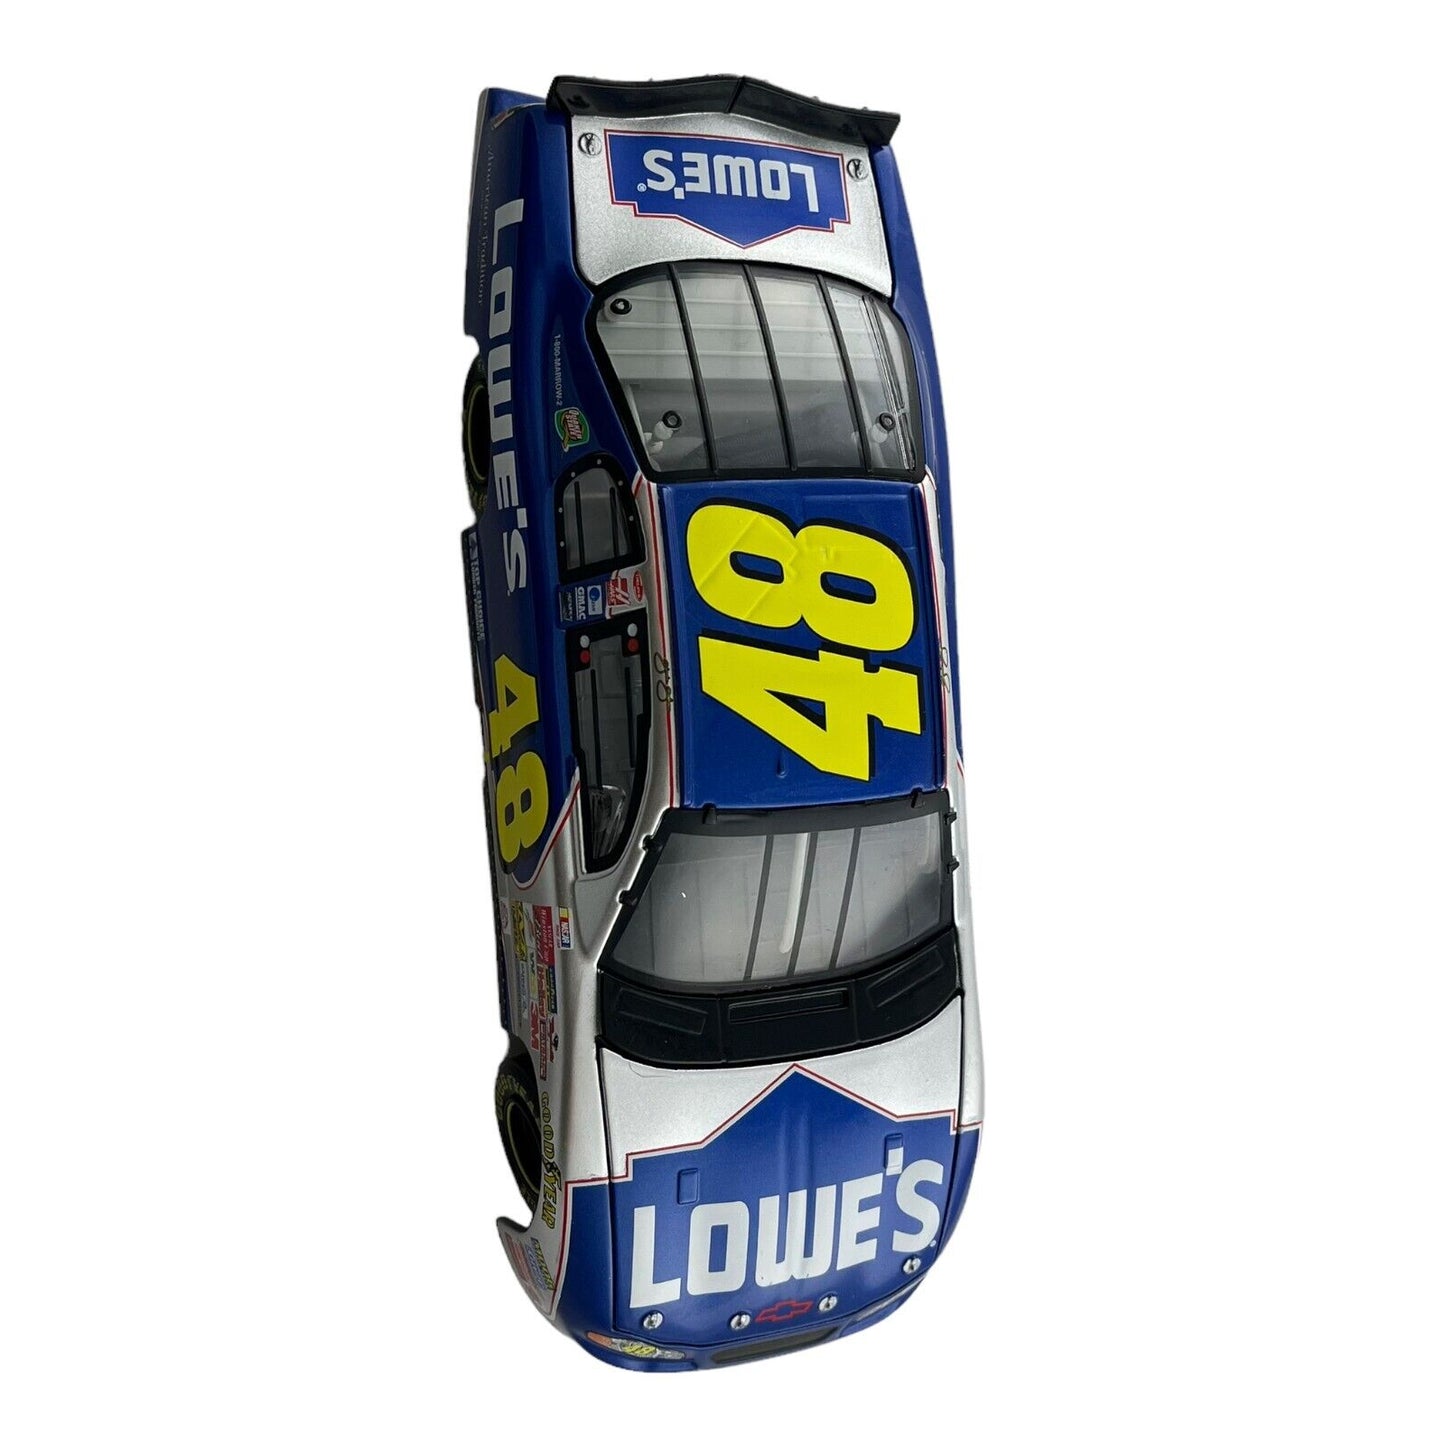 1:24 Scale Jimmie Johnson #48 Lowe s Diecast Vehicle 2002 Action